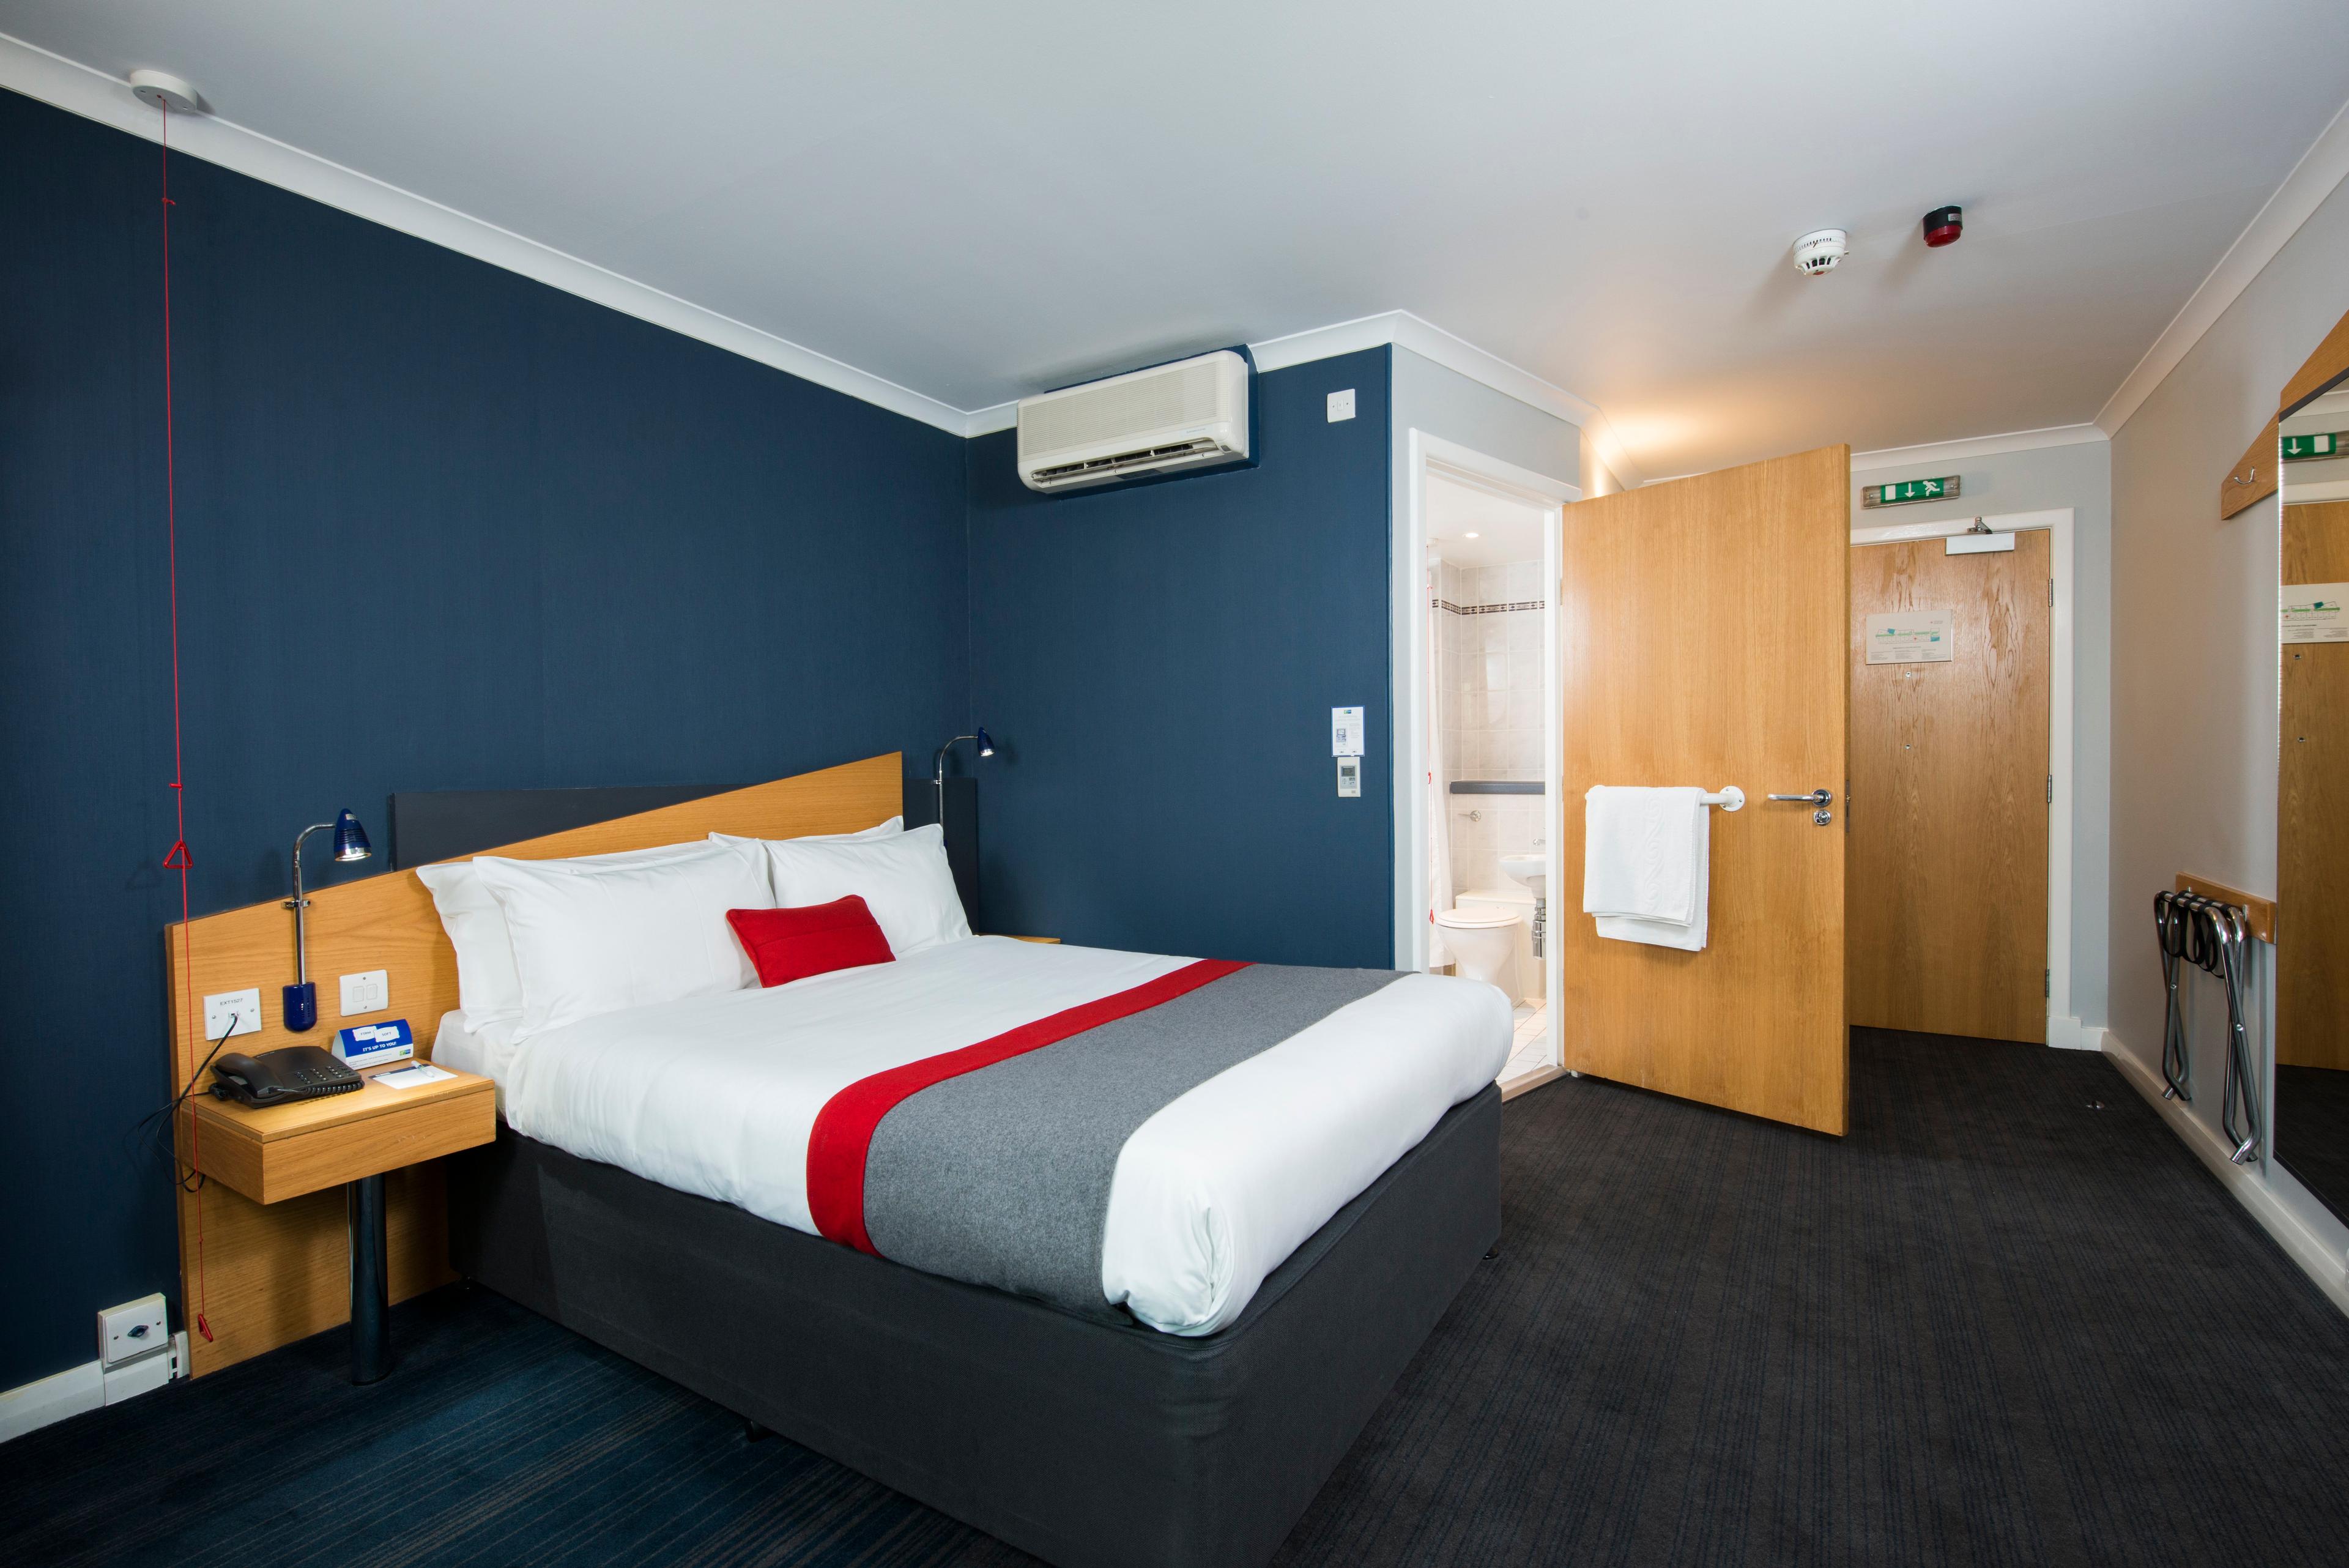 Our accessible rooms are practical with wider door frames